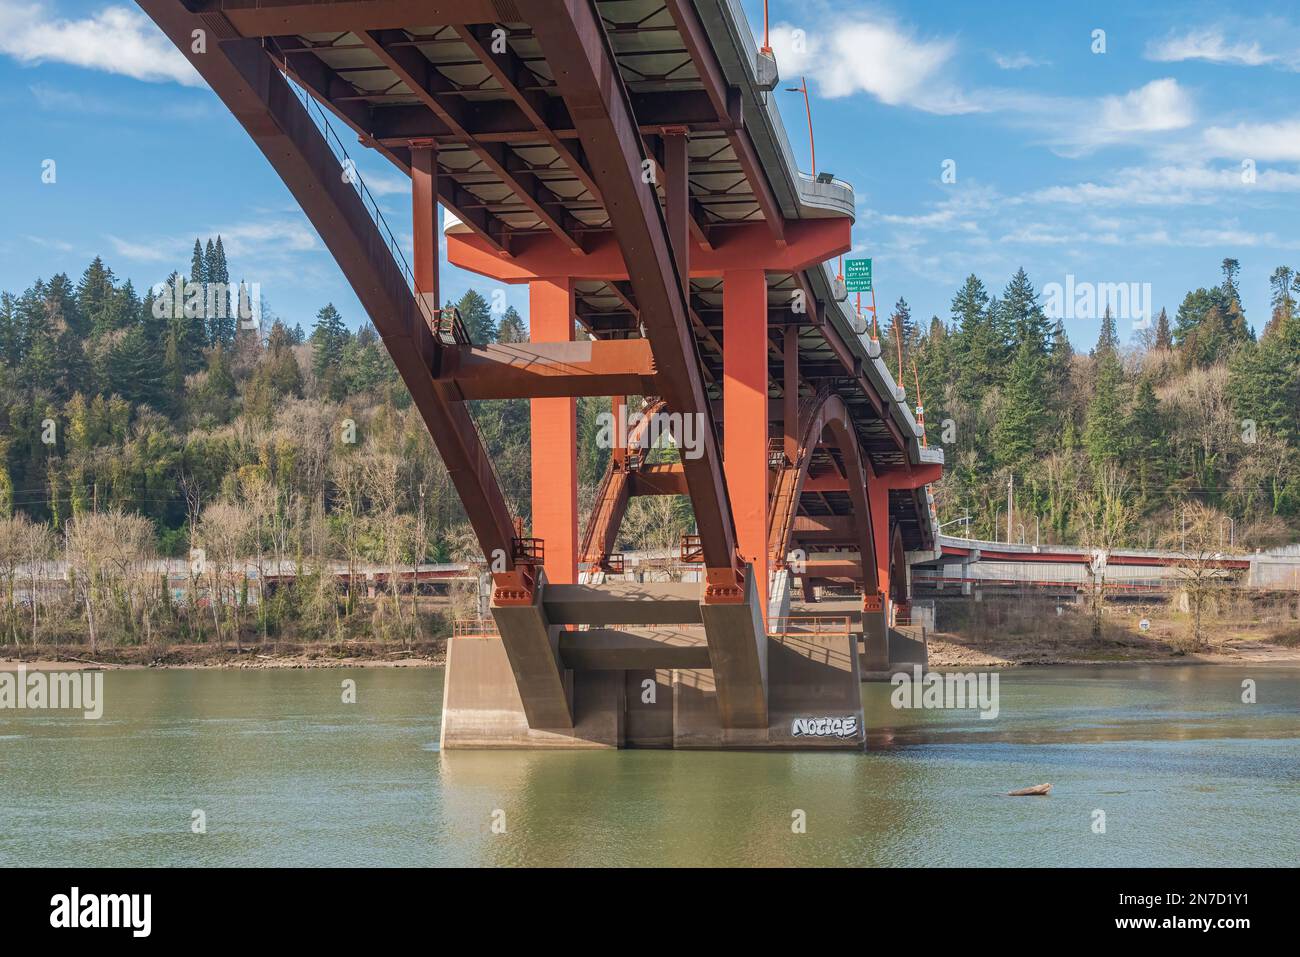 The Sellwood bridge crossings infrastructure in Portland Oregon state. Stock Photo